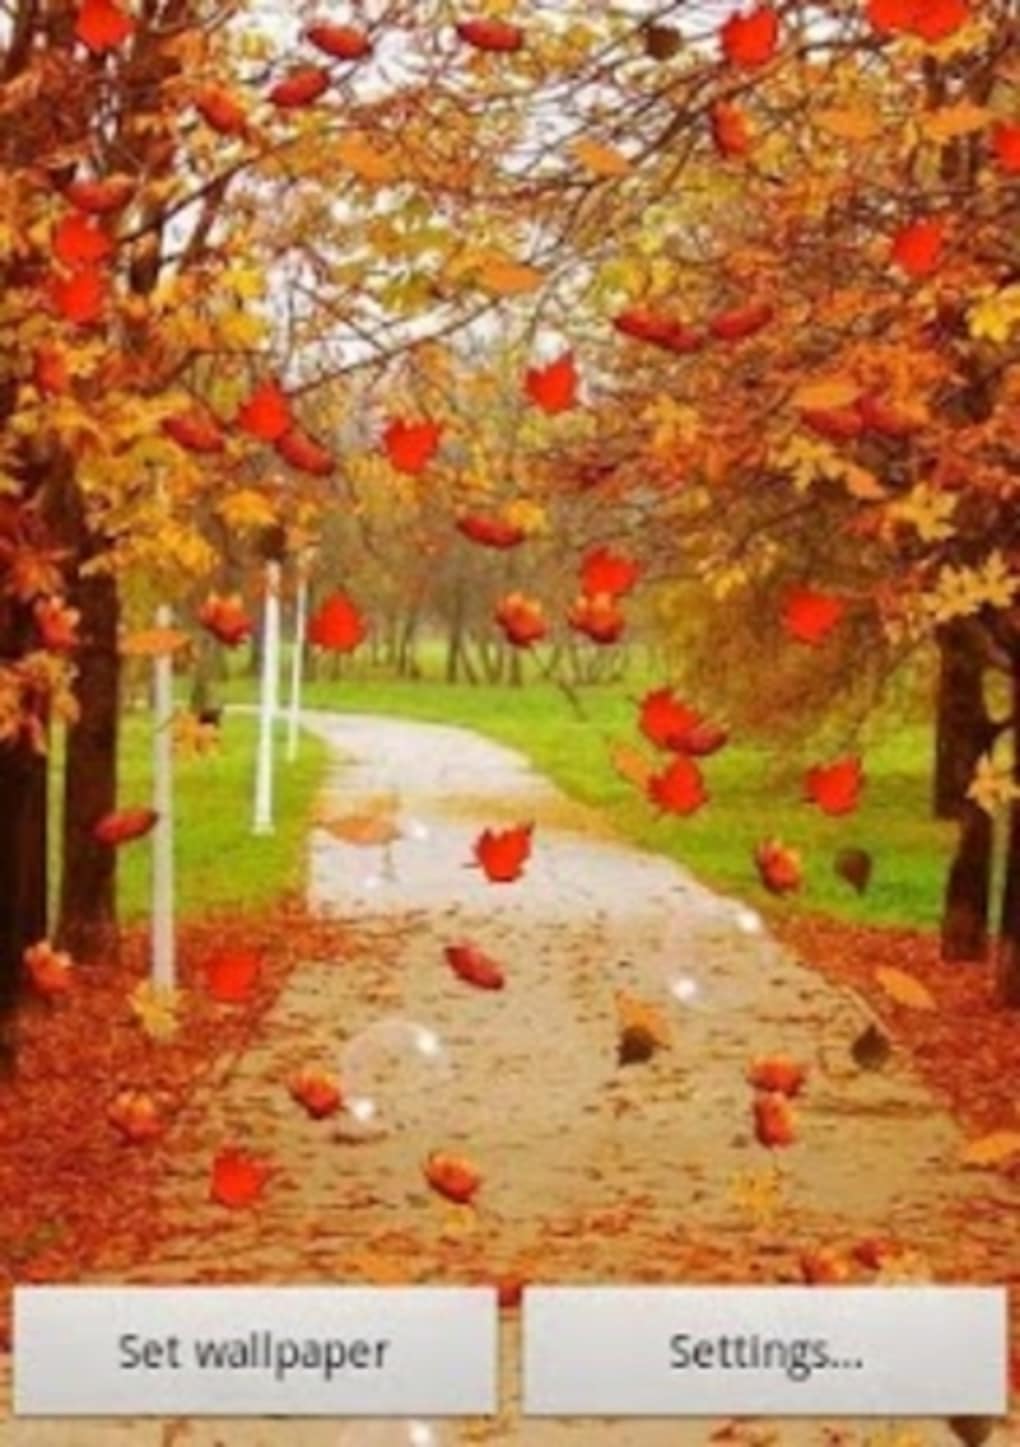 Autumn Live Wallpaper Free cho Android - Tải về